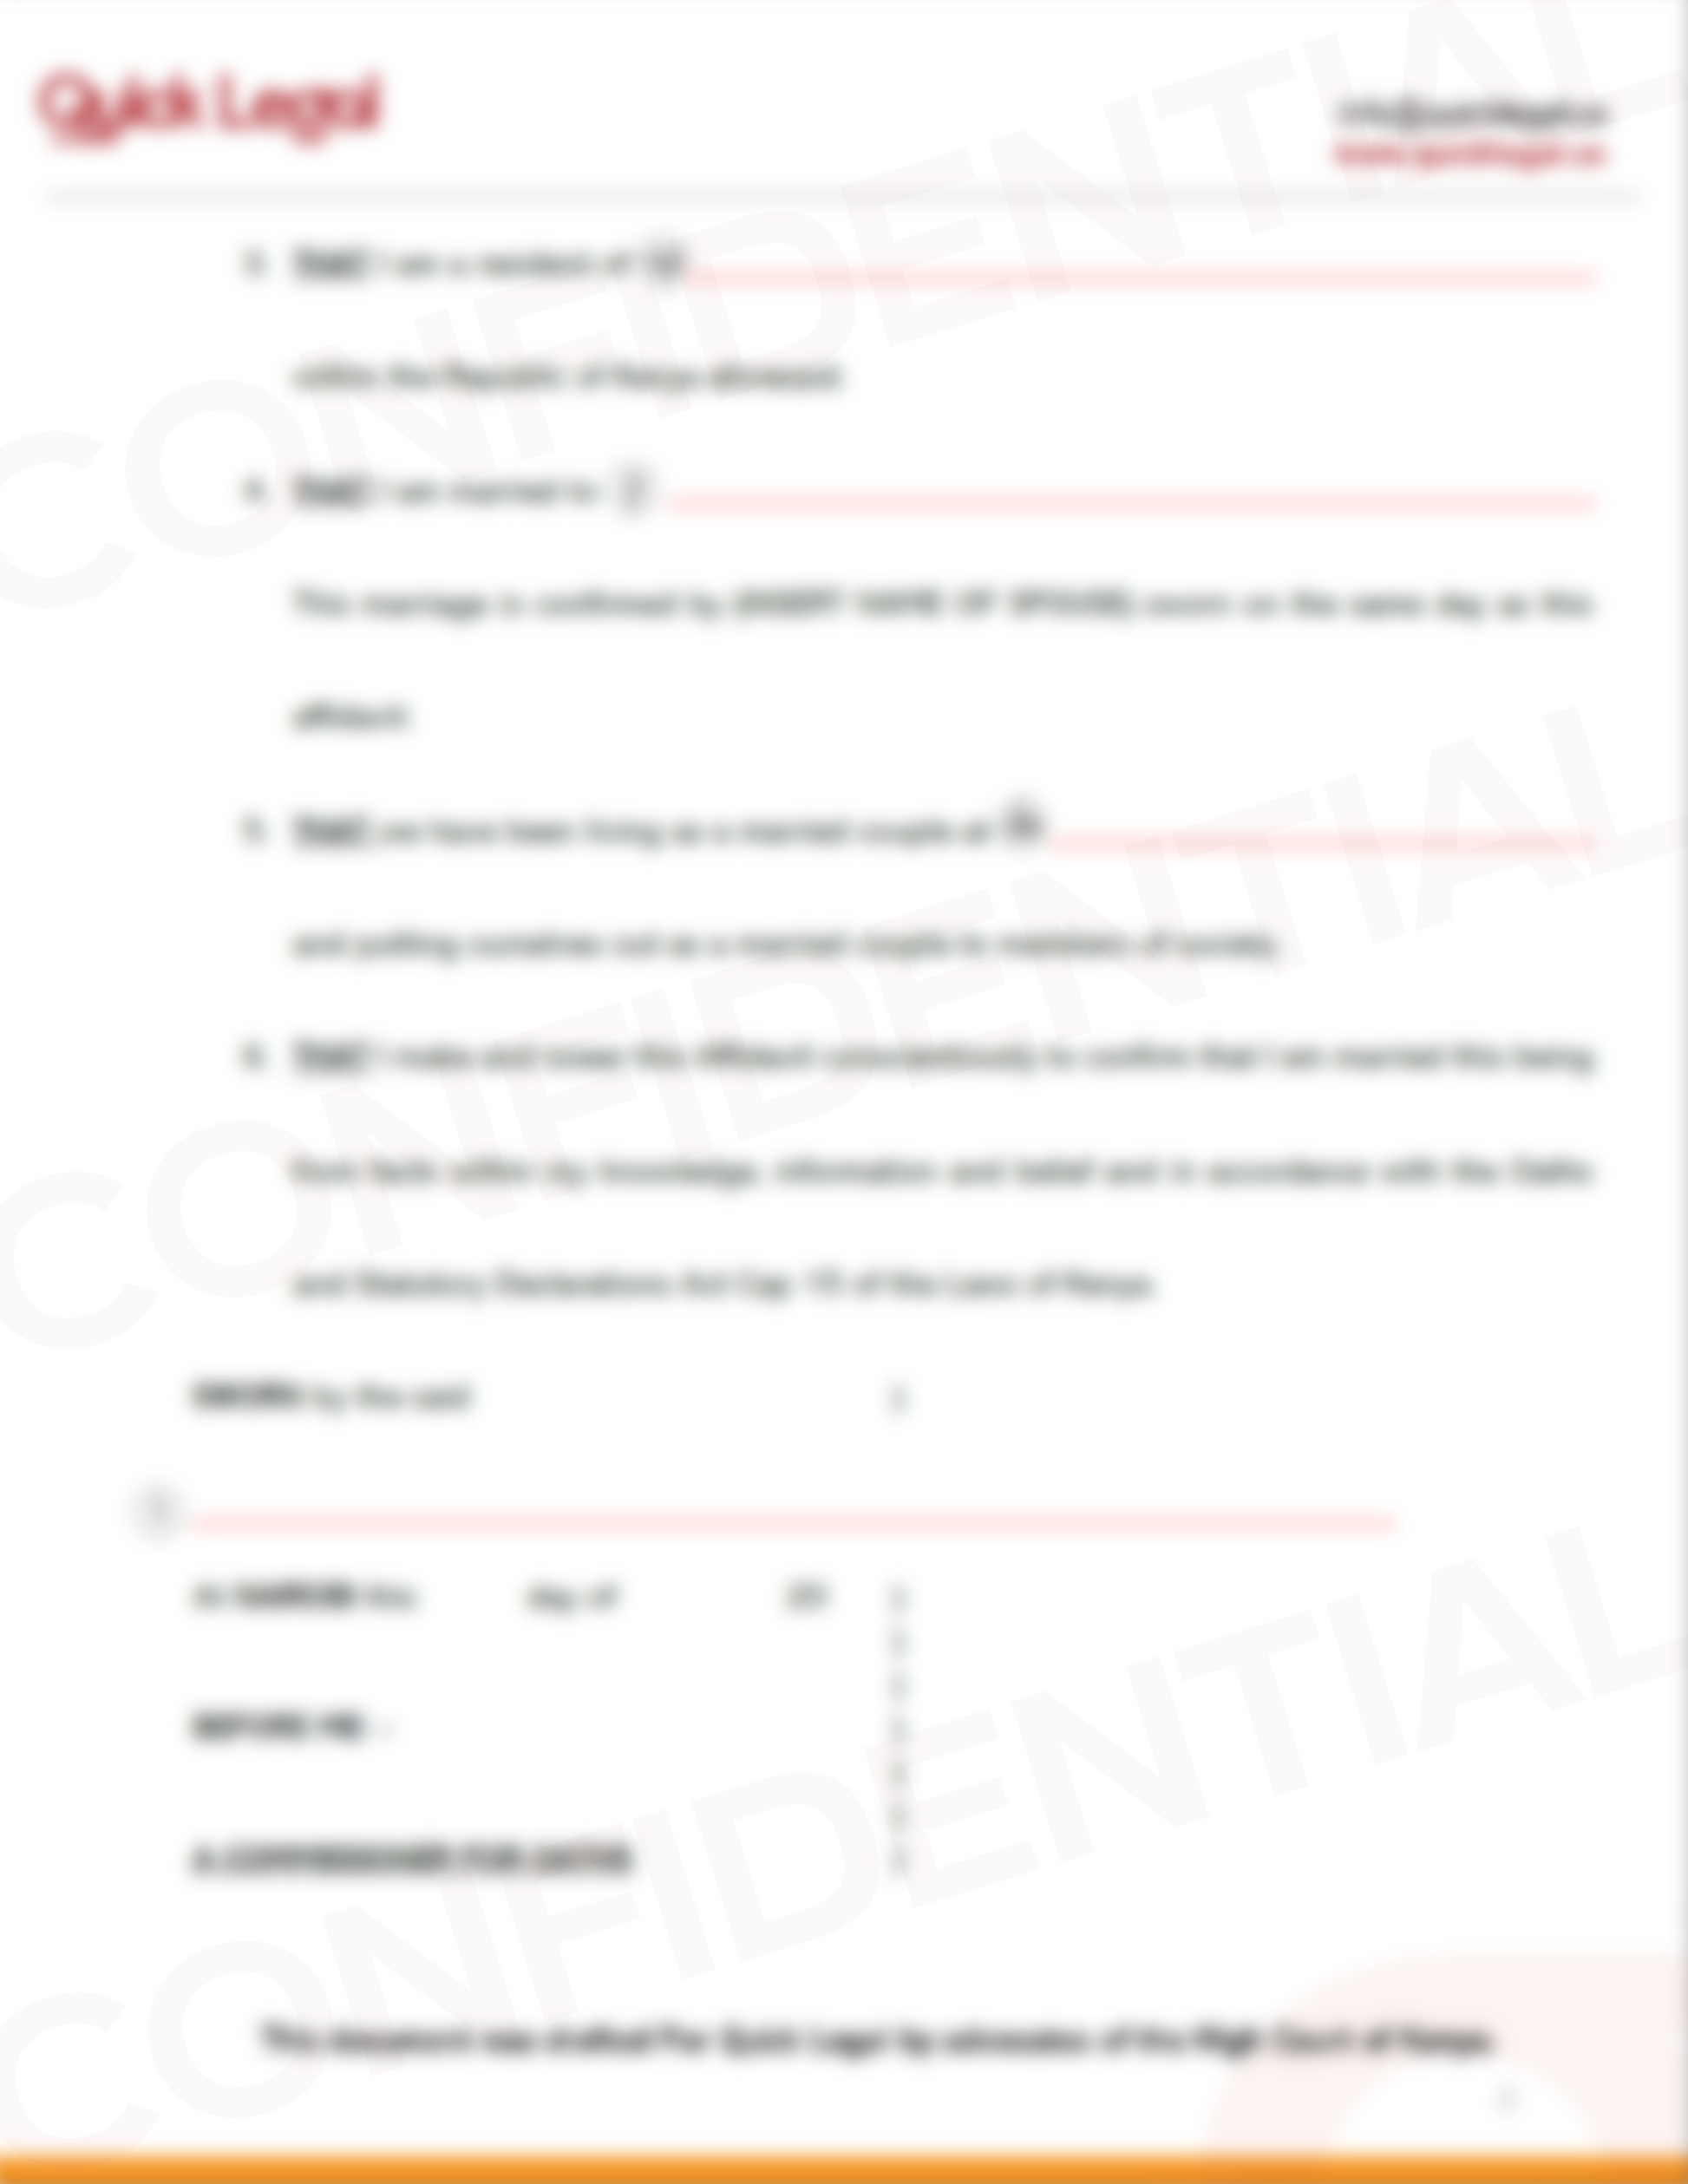 Customizable Affidavit of Marriage template - Downloadable for property, insurance, and inheritance proof-blurred